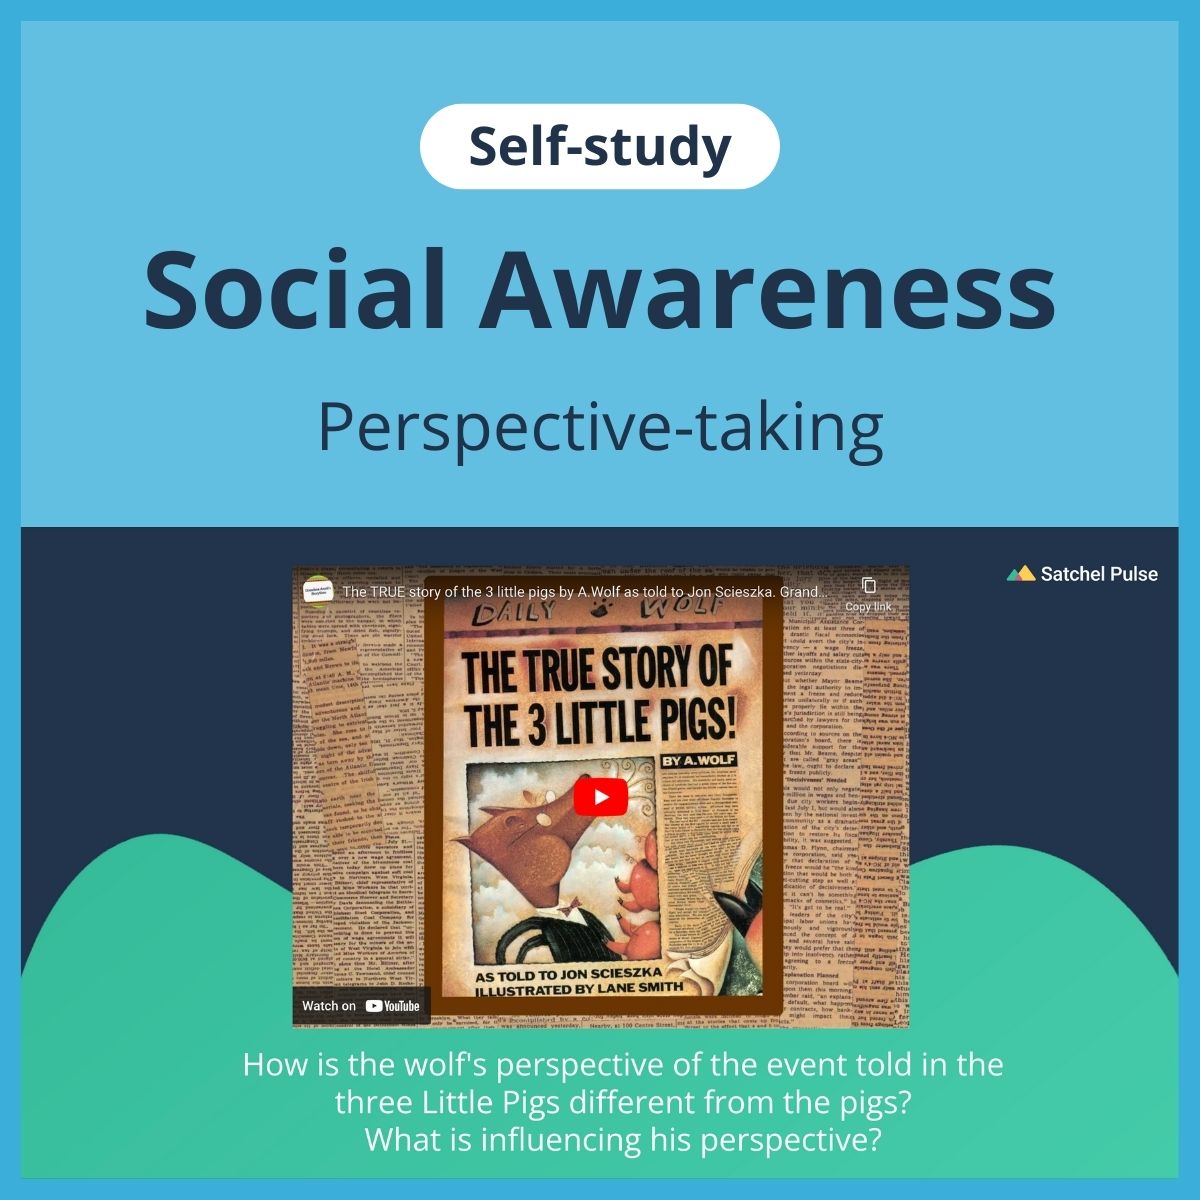 SEL self-study focusing on Perspective-Taking to use in your classroom as one of your SEL activities for Social Awareness